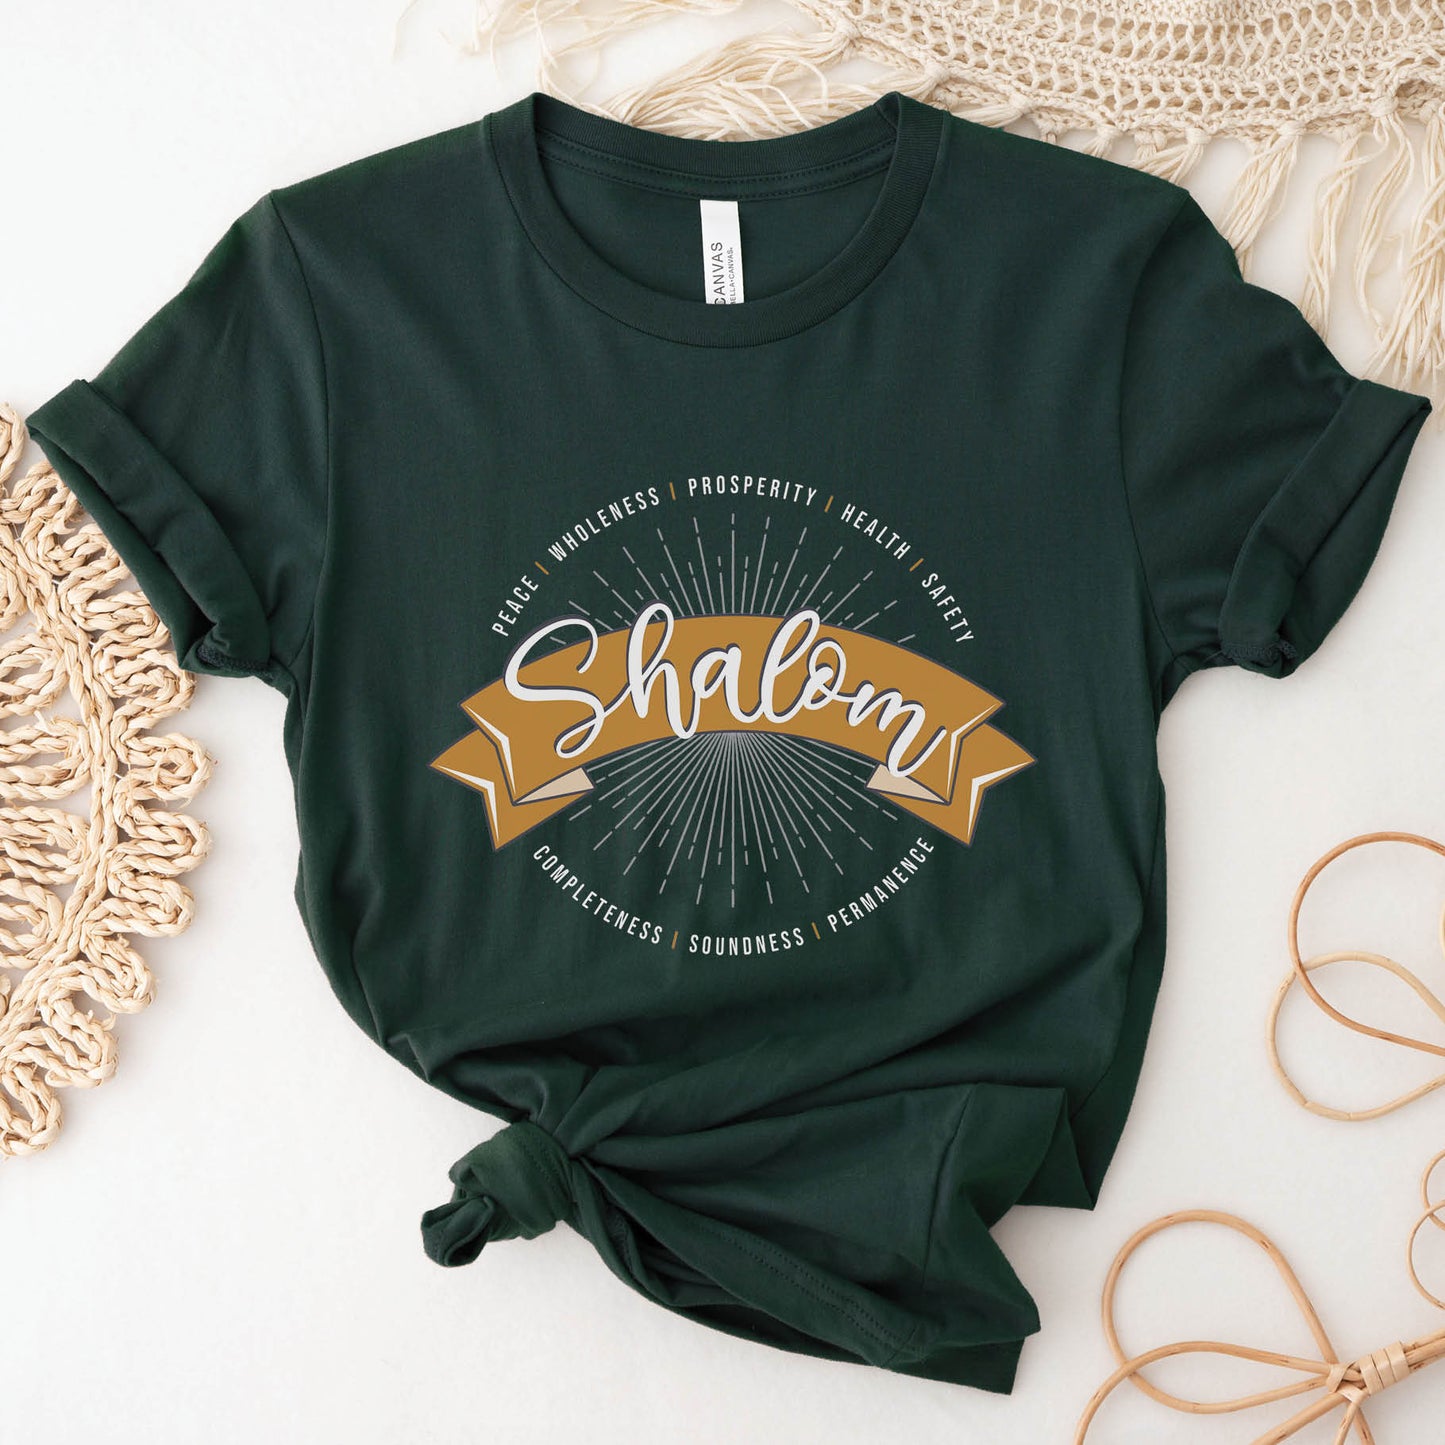 Soft forest dark green faith-based Christian women's unisex t-shirt with a gold banner and sunburst design that says the Biblical Hebrew meaning of the word "SHALOM" - Peace, Completeness, Prosperity, Health, Safety, Wholeness, Soundness, and Permanence definition, makes a great mother's day gift for mom!